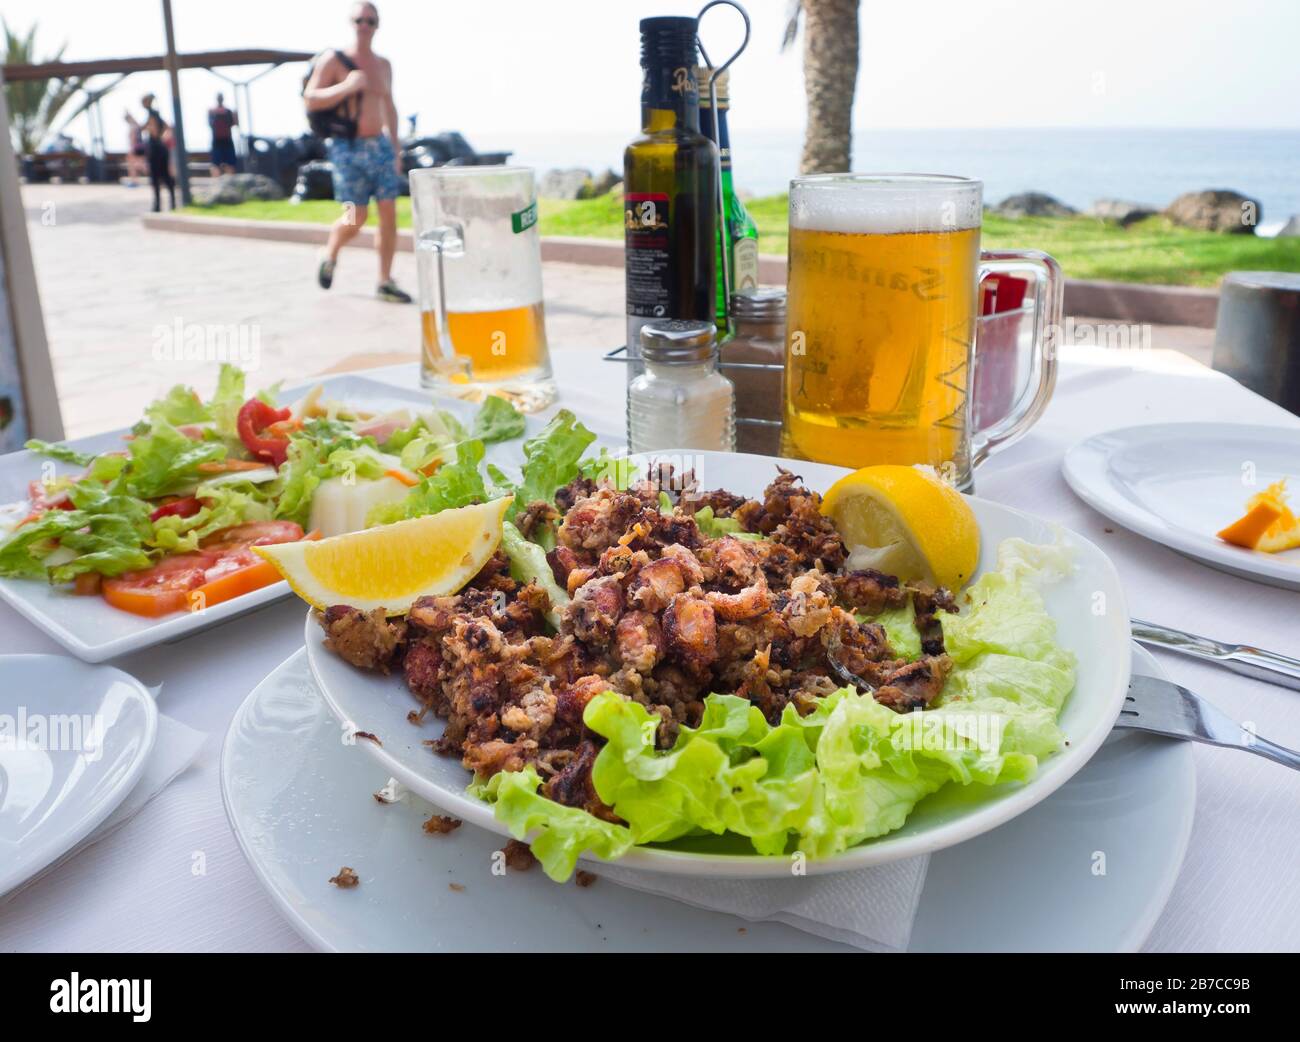 Chopitos, a tasty fry up dish of tiny Sepia orbignyana served with a cold beer on the seafront promenade in Costa Adeje, Tenerife Canary Islands Spain Stock Photo